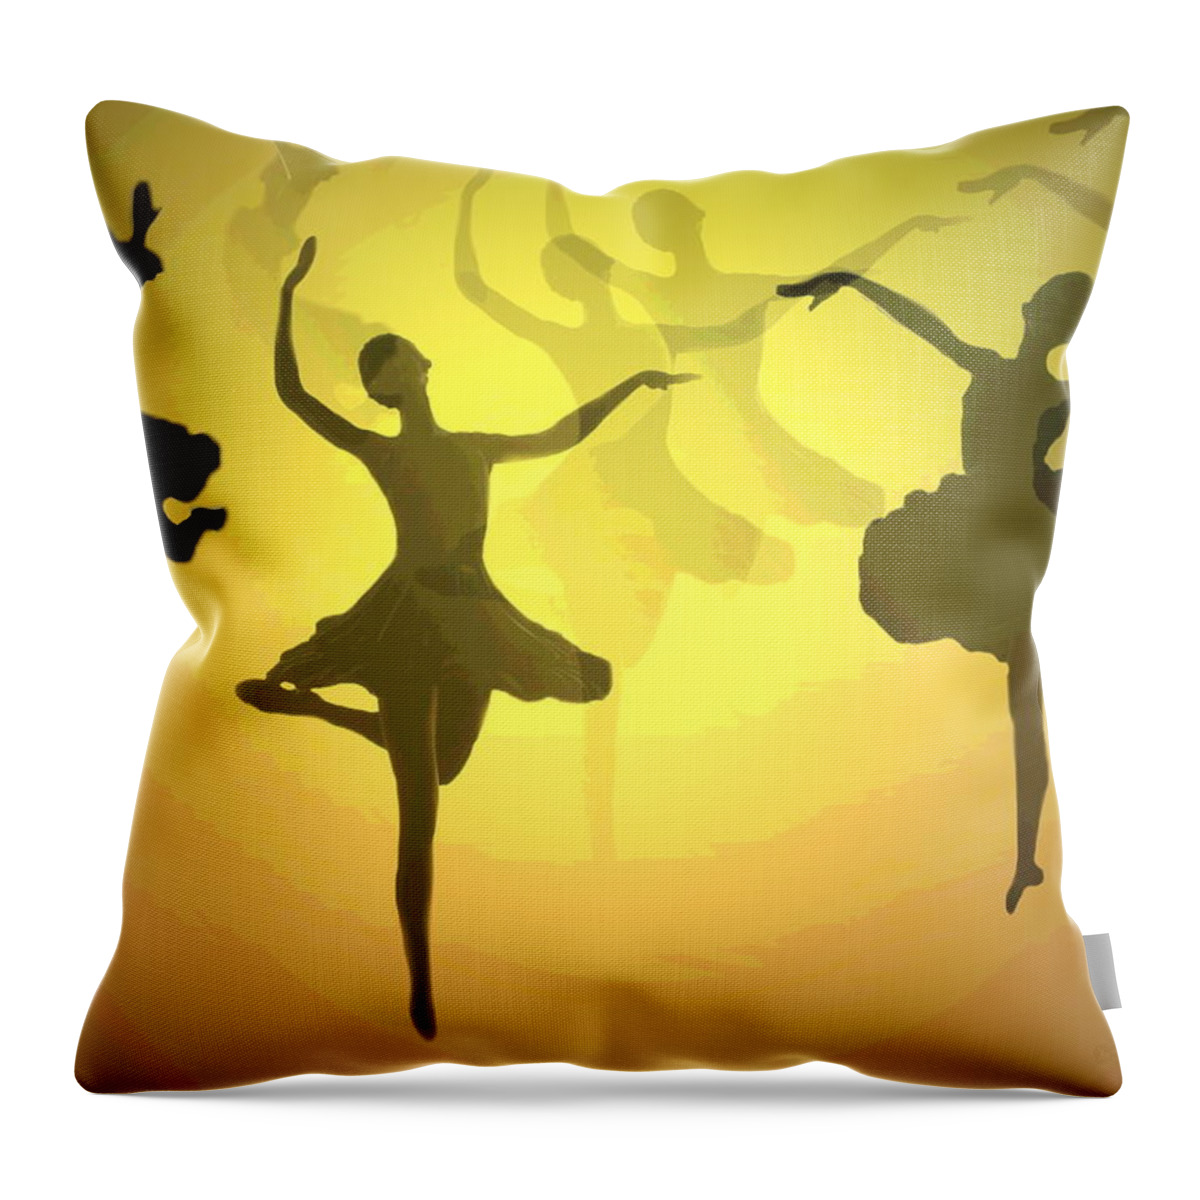 Ballerina Throw Pillow featuring the photograph Dance With Us Into The Light by Joyce Dickens